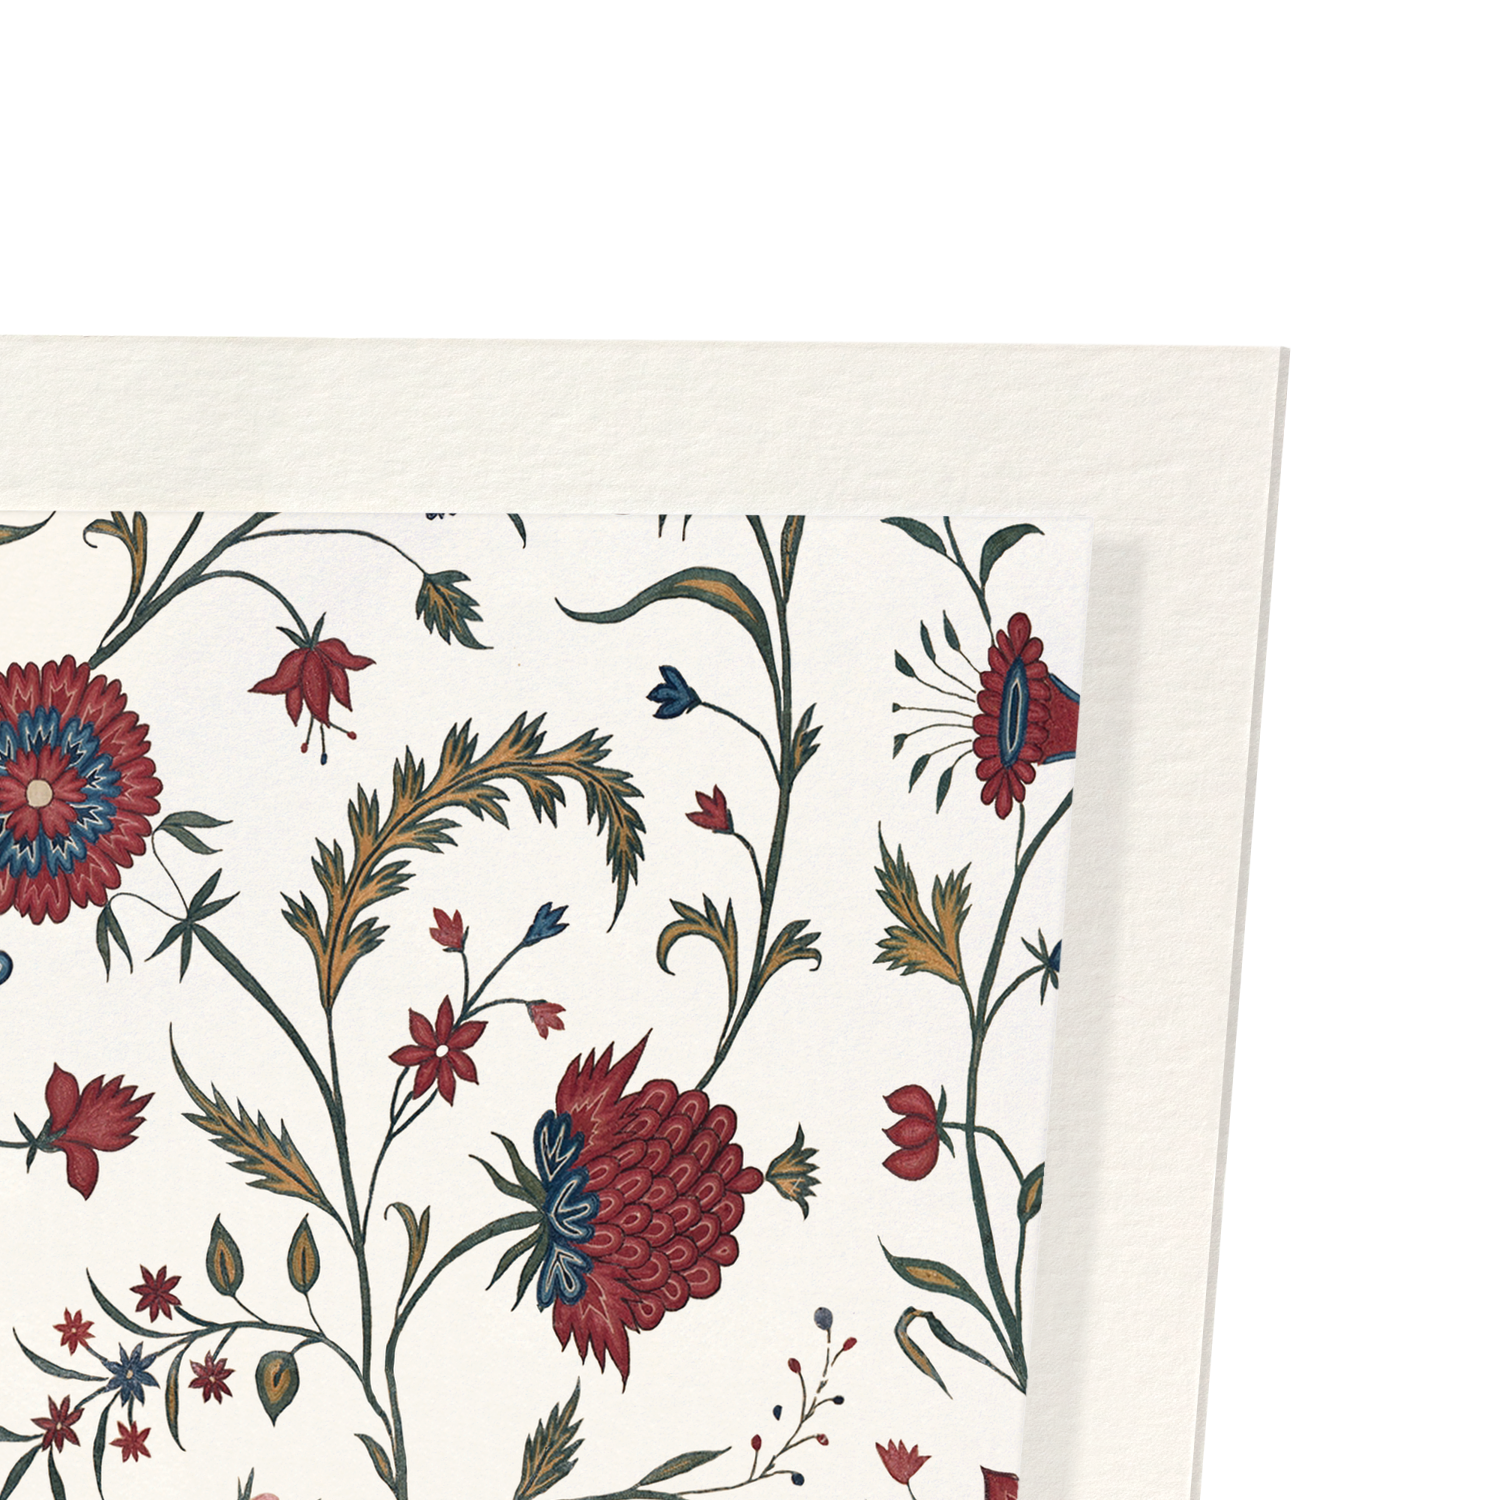 RED FLORAL EMBROIDERY (18TH C.): Pattern Art Print